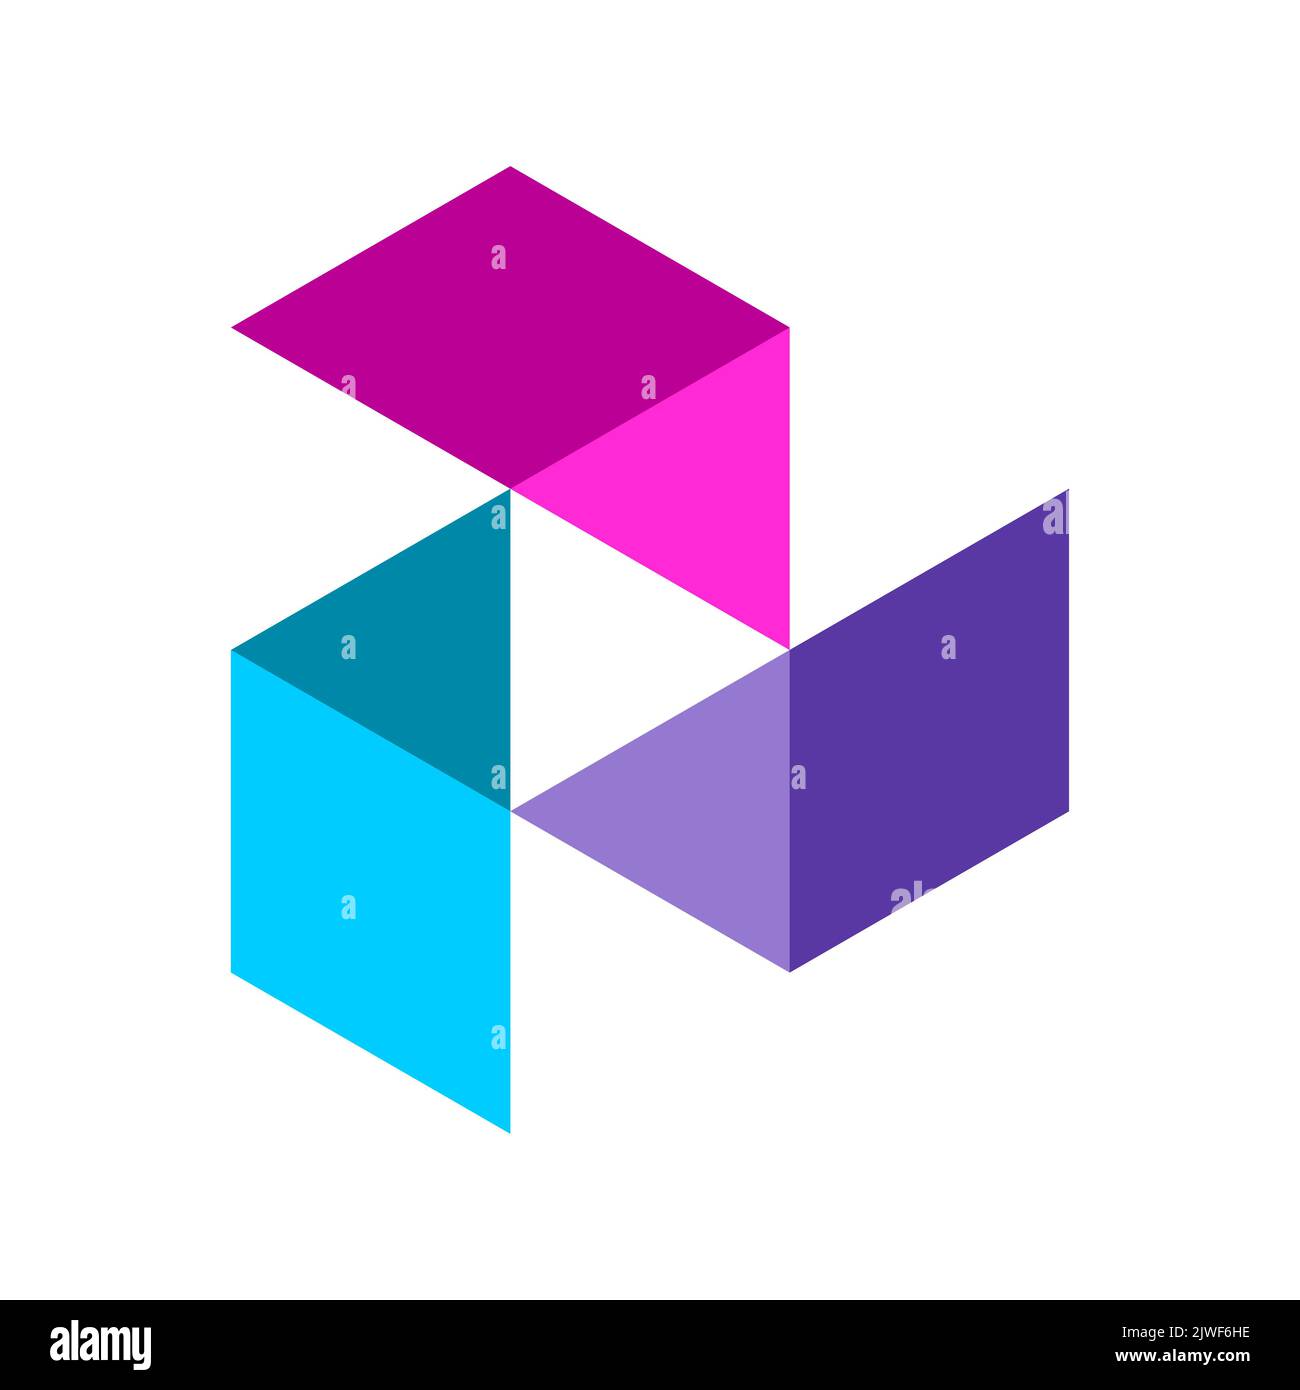 Colorful play button. Stylized geometric play symbol. Isometric shapes forming a triangle in a negative space. Right arrow or forward sign. Vector Stock Vector